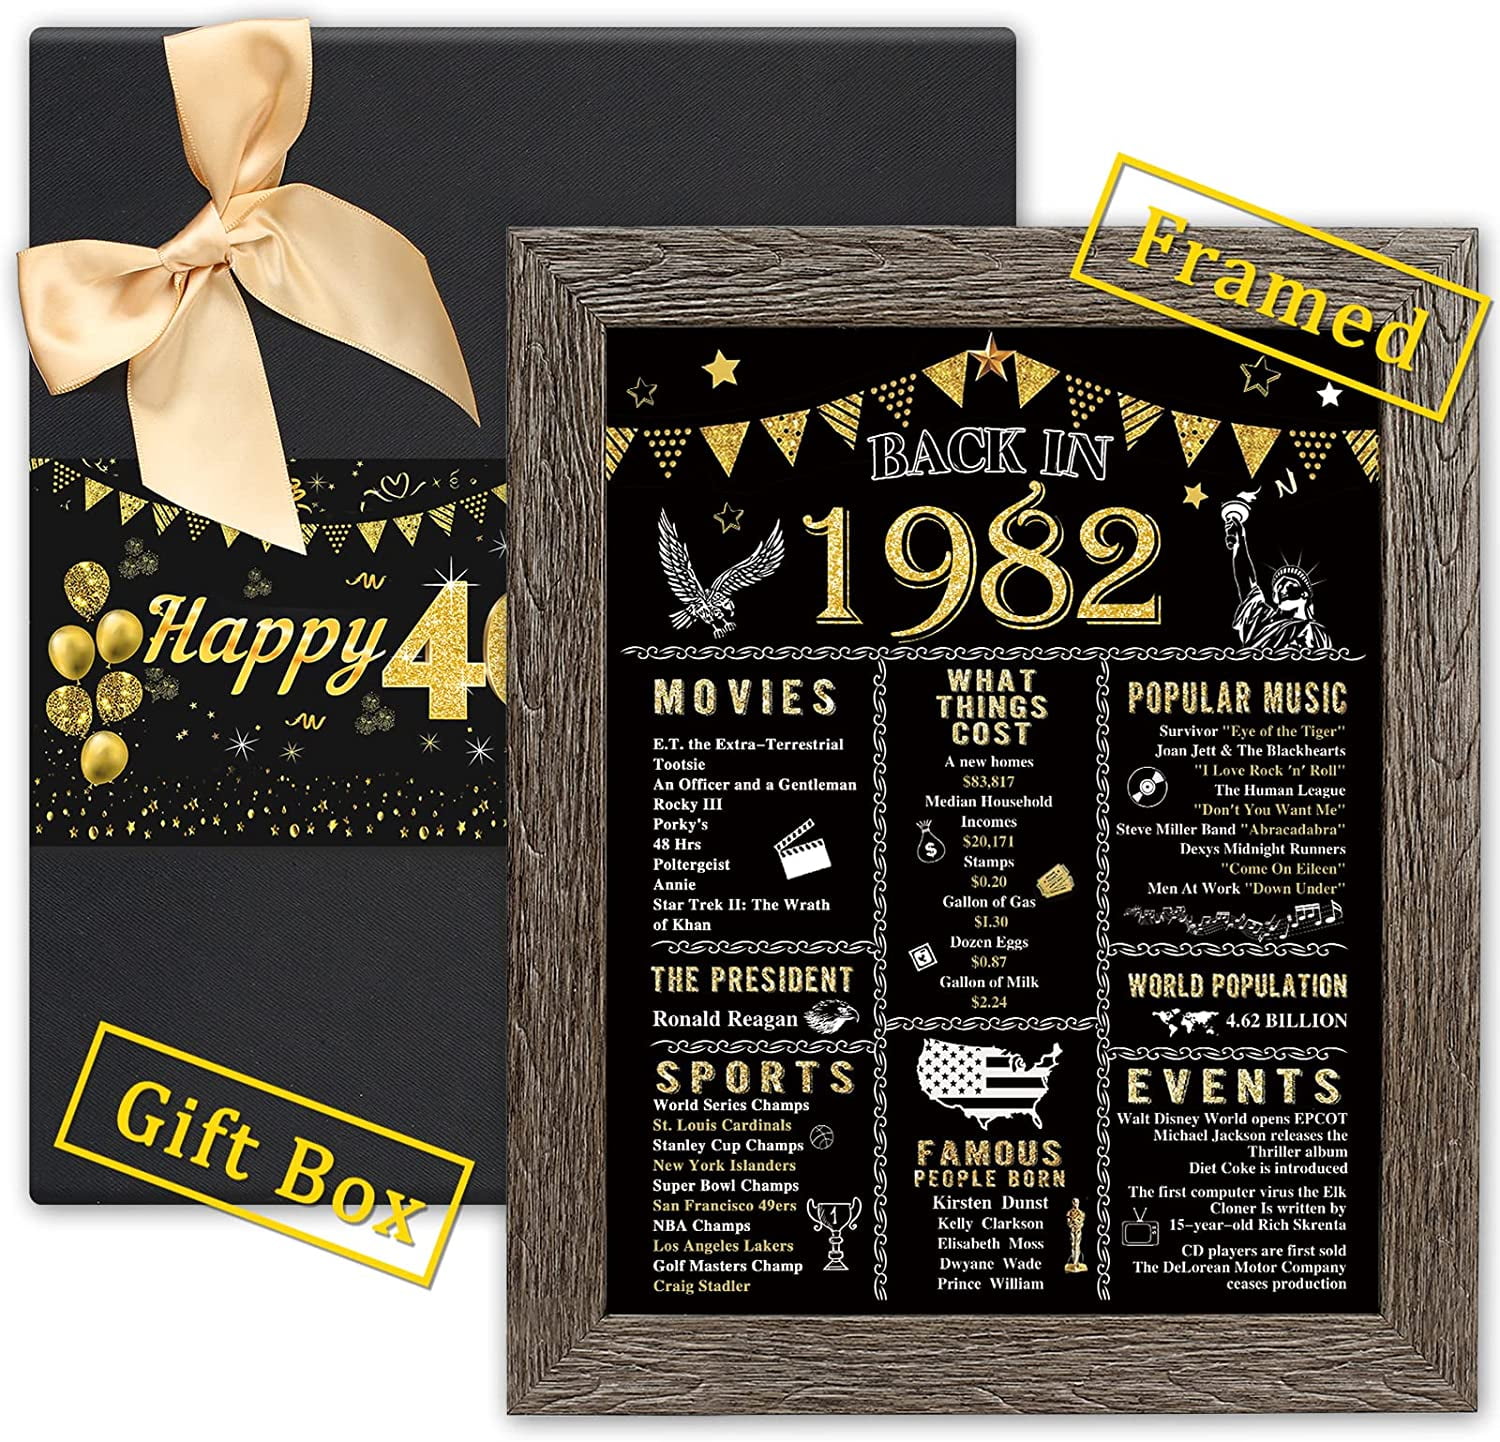 Mierting 40th Birthday Gifts for Men & Women, FRAMED 1982 Birthday Decorations with Beautiful Gift Box, Men's & Women's Happy 40th Birthday Gift Ideas, Back In 1982 Poster- 8" x 10" - Walmart.com